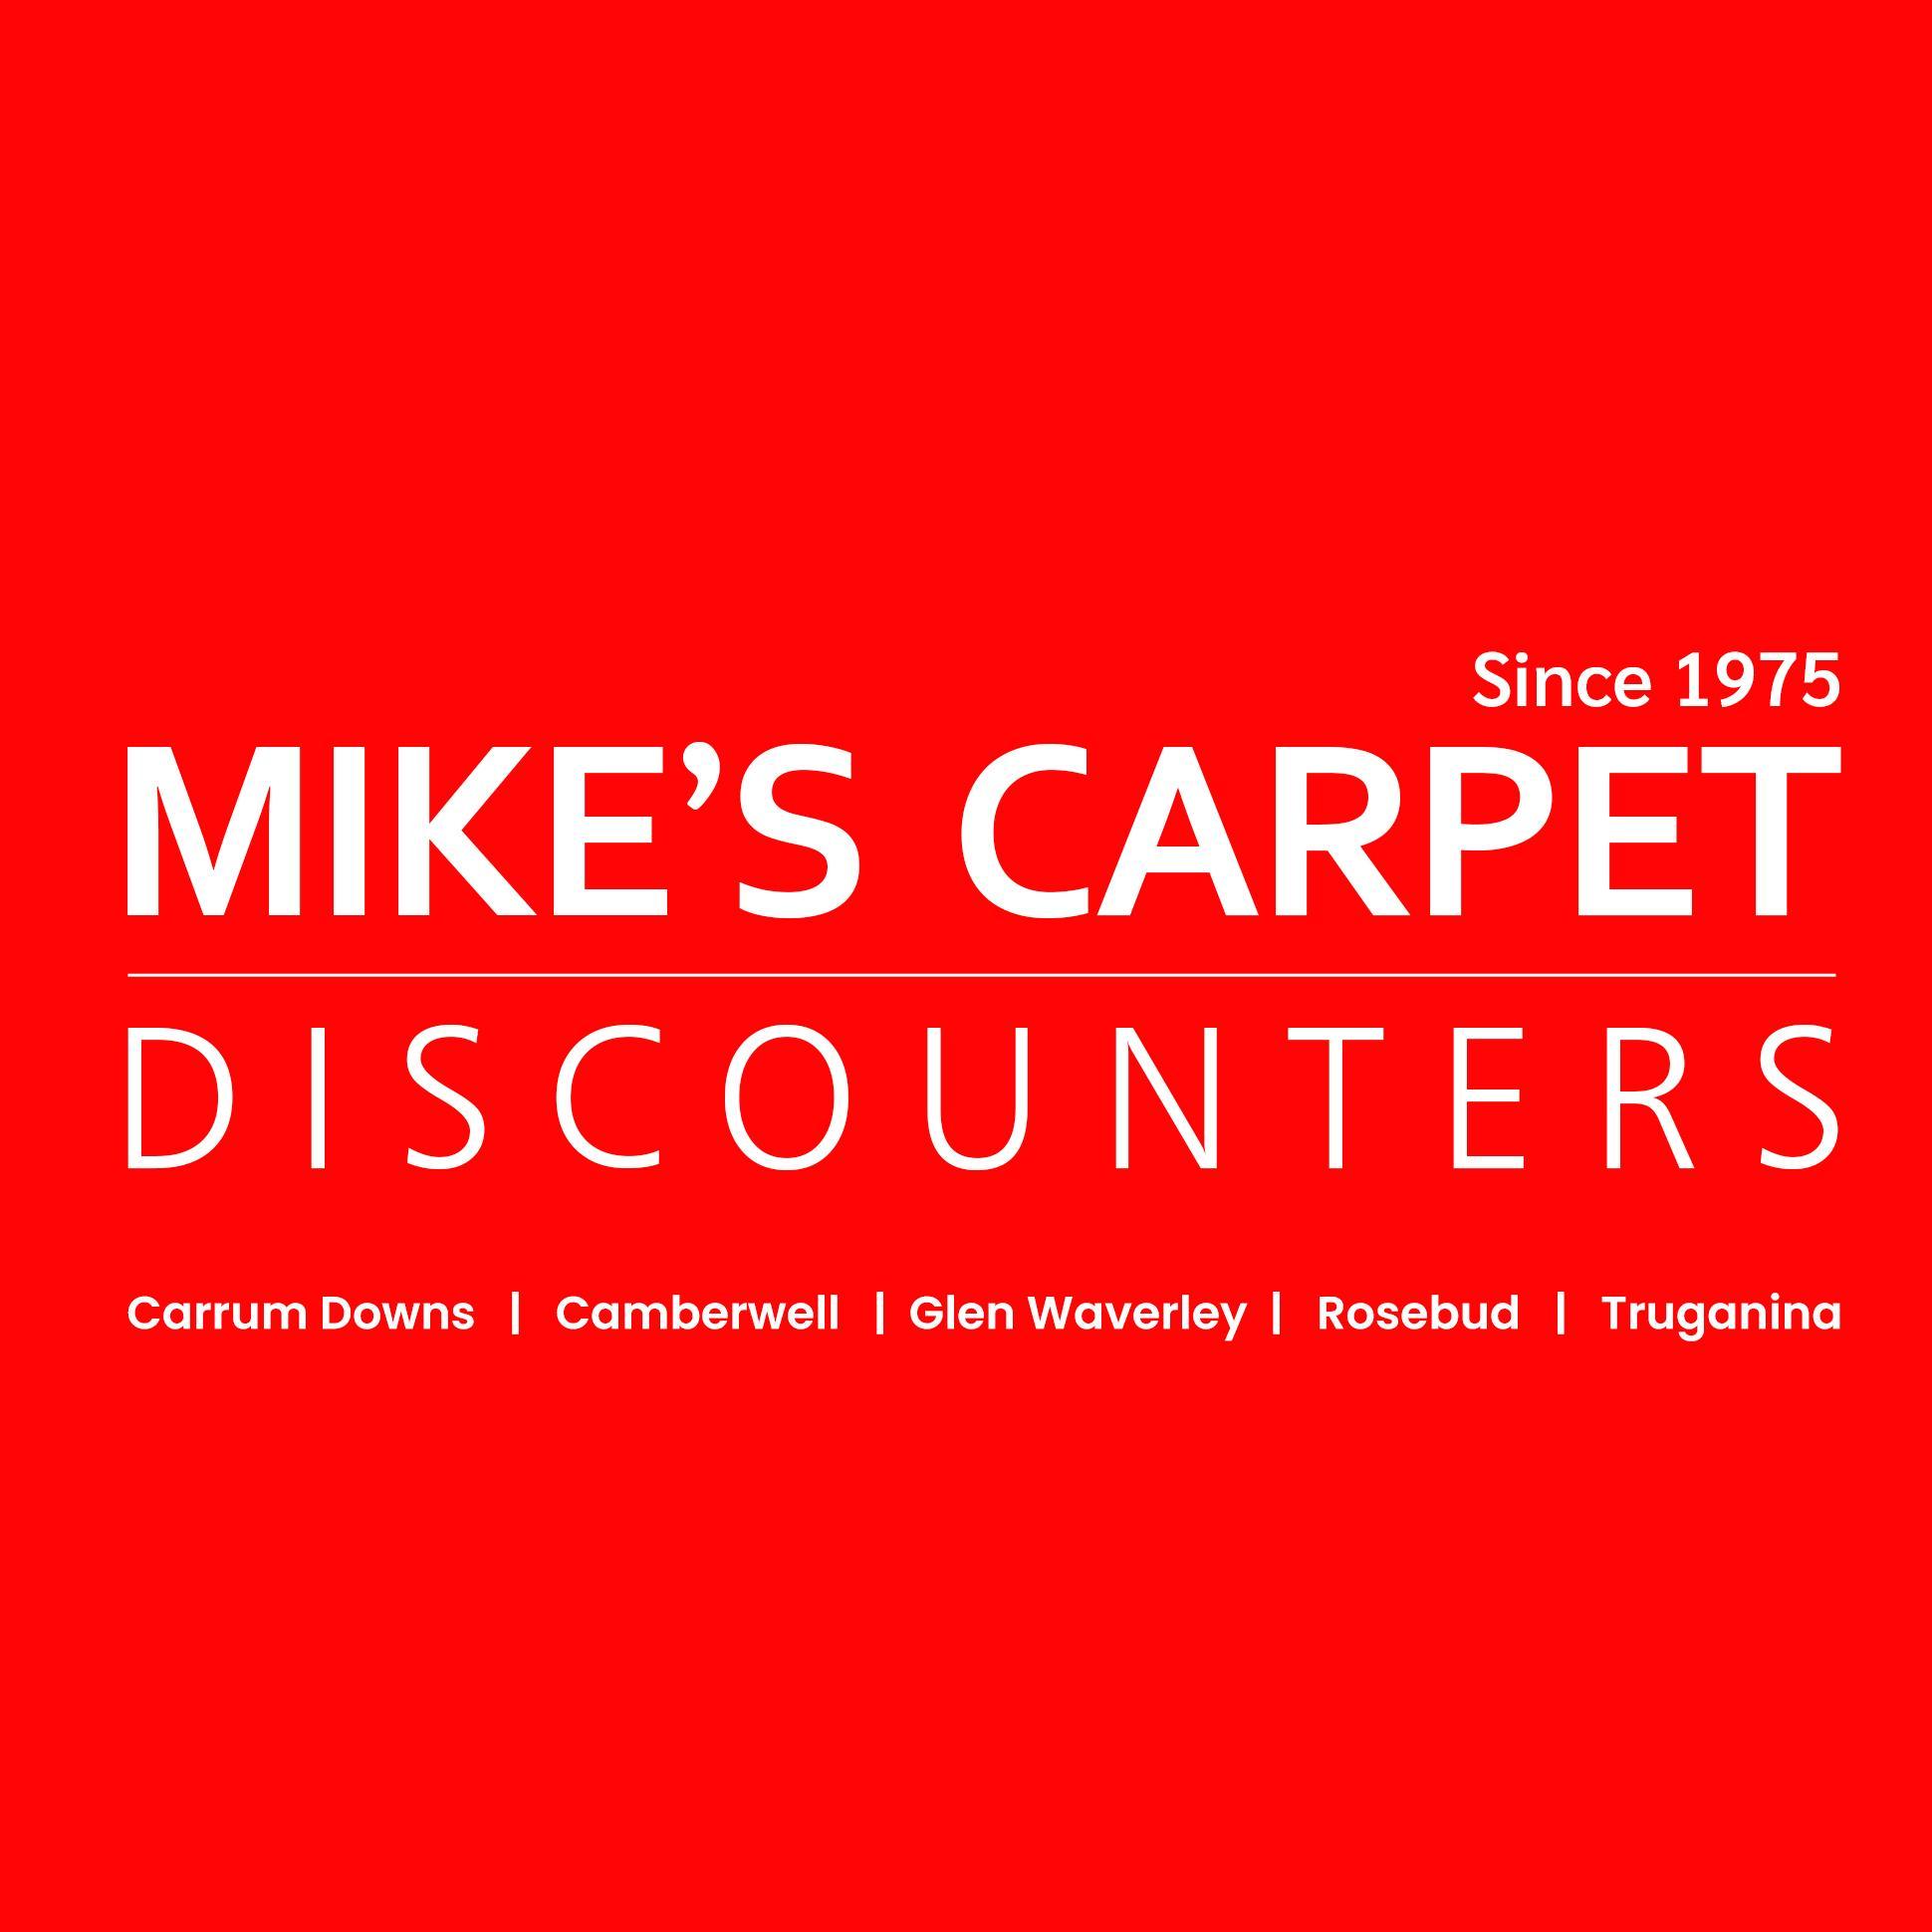 Mikes Carpet Discounters